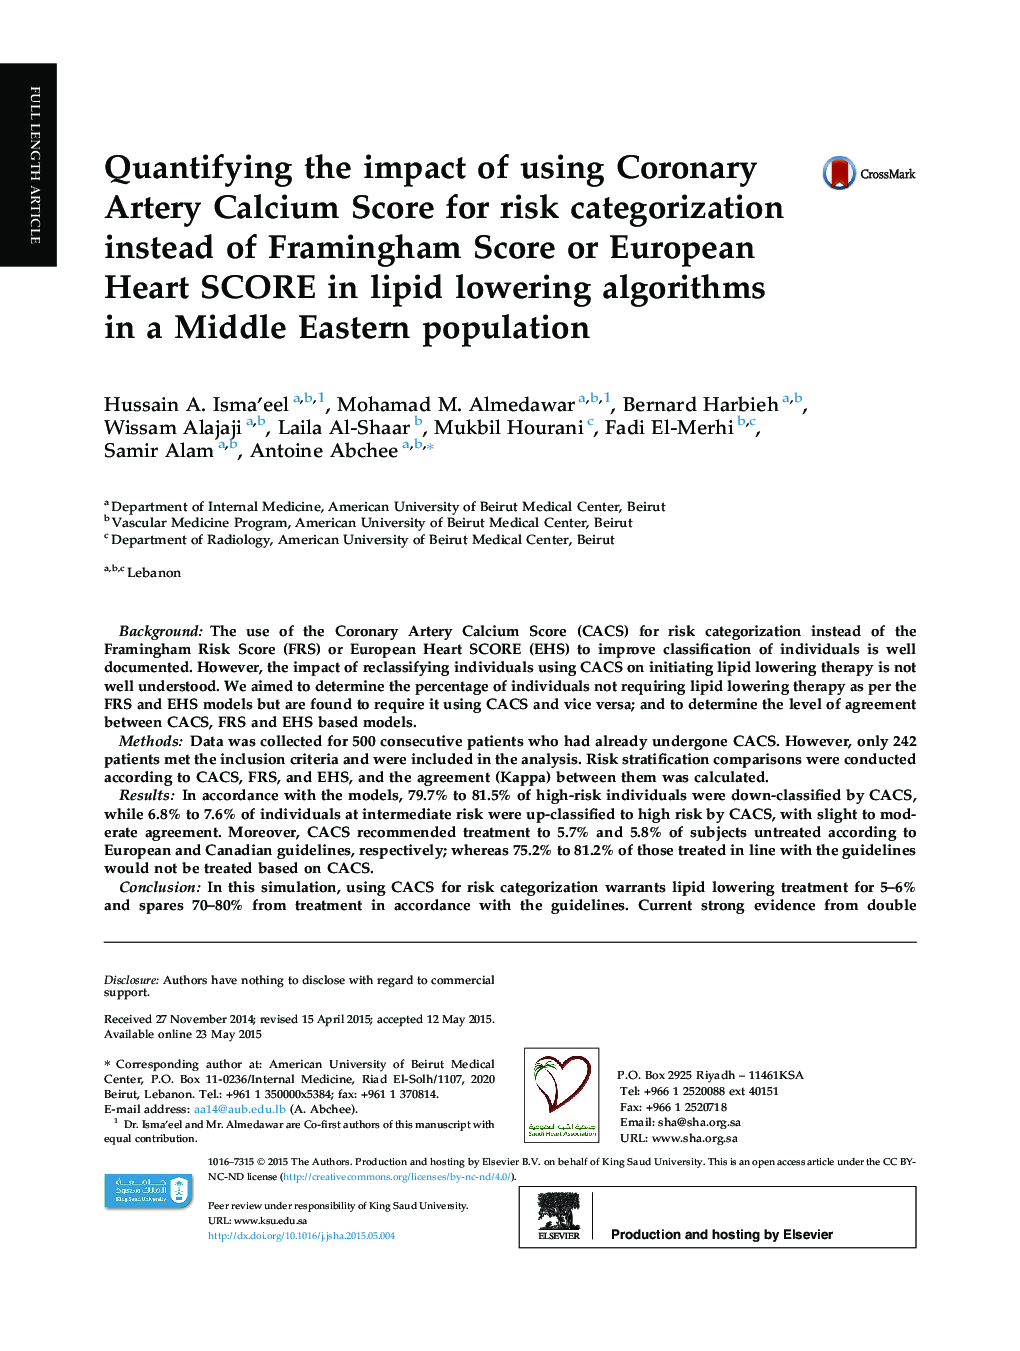 Quantifying the impact of using Coronary Artery Calcium Score for risk categorization instead of Framingham Score or European Heart SCORE in lipid lowering algorithms in a Middle Eastern population 